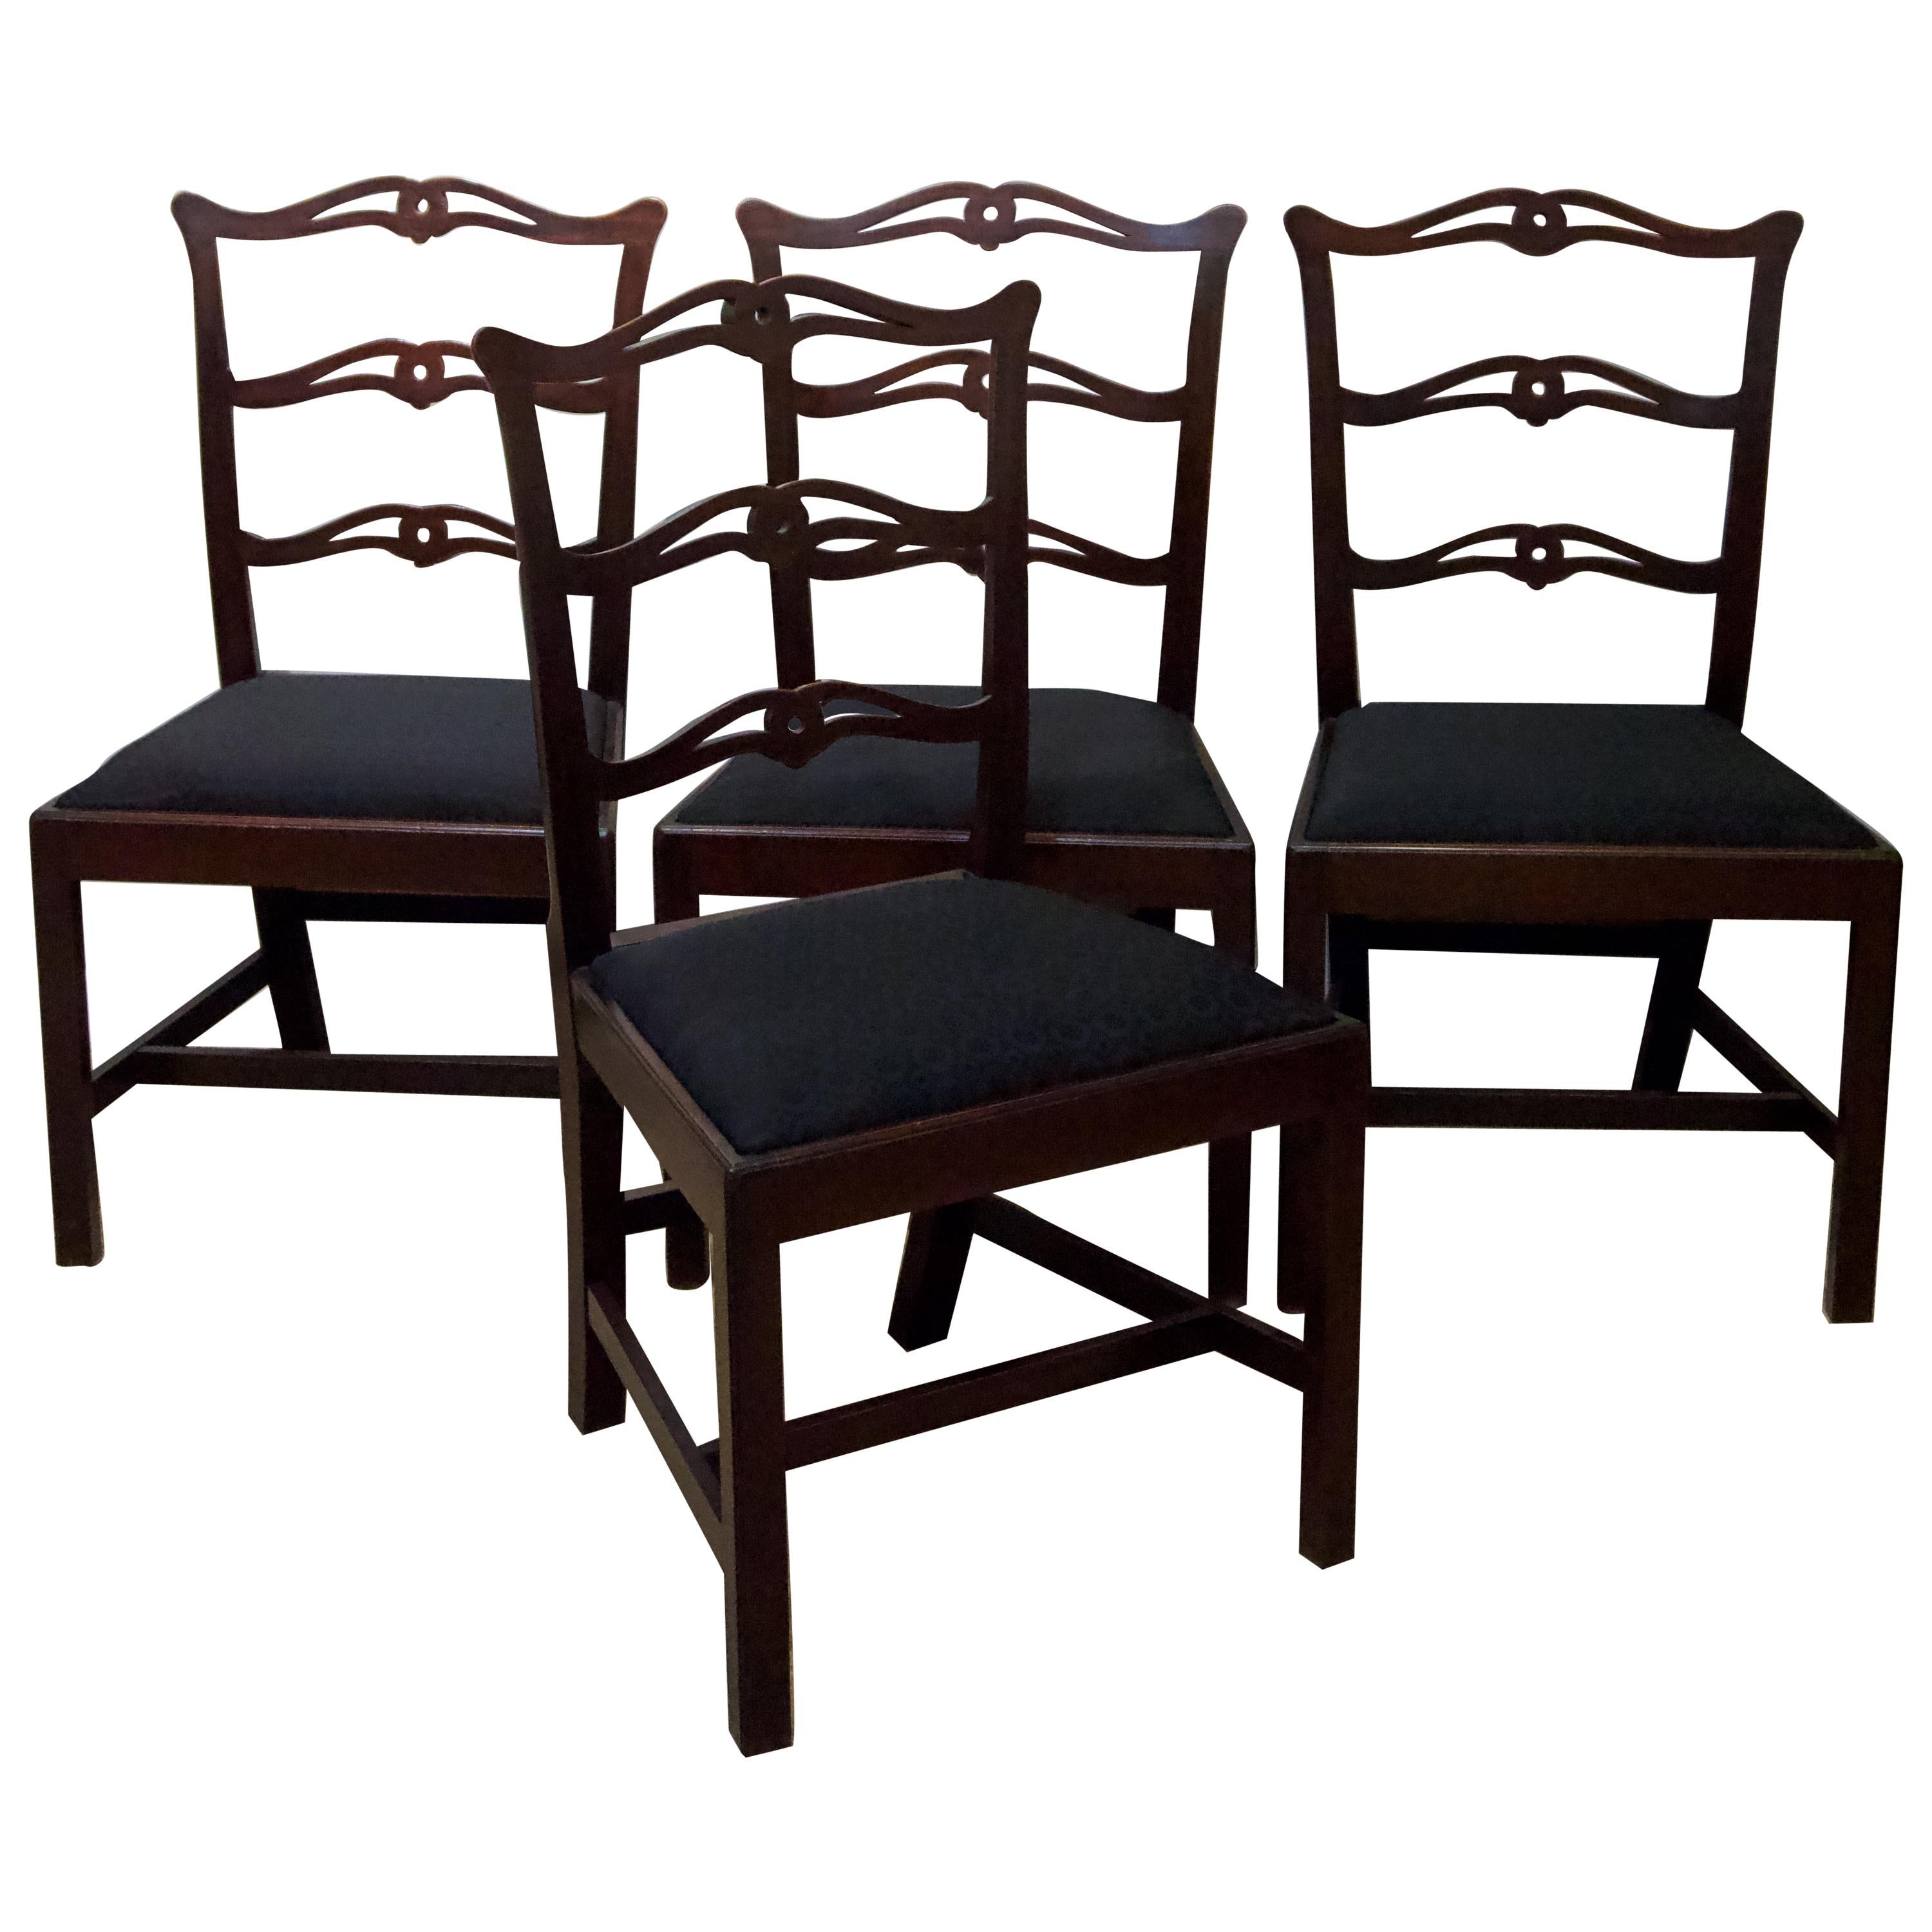 Set of 4 George III Ladder Back Side Chairs with Slip Seats